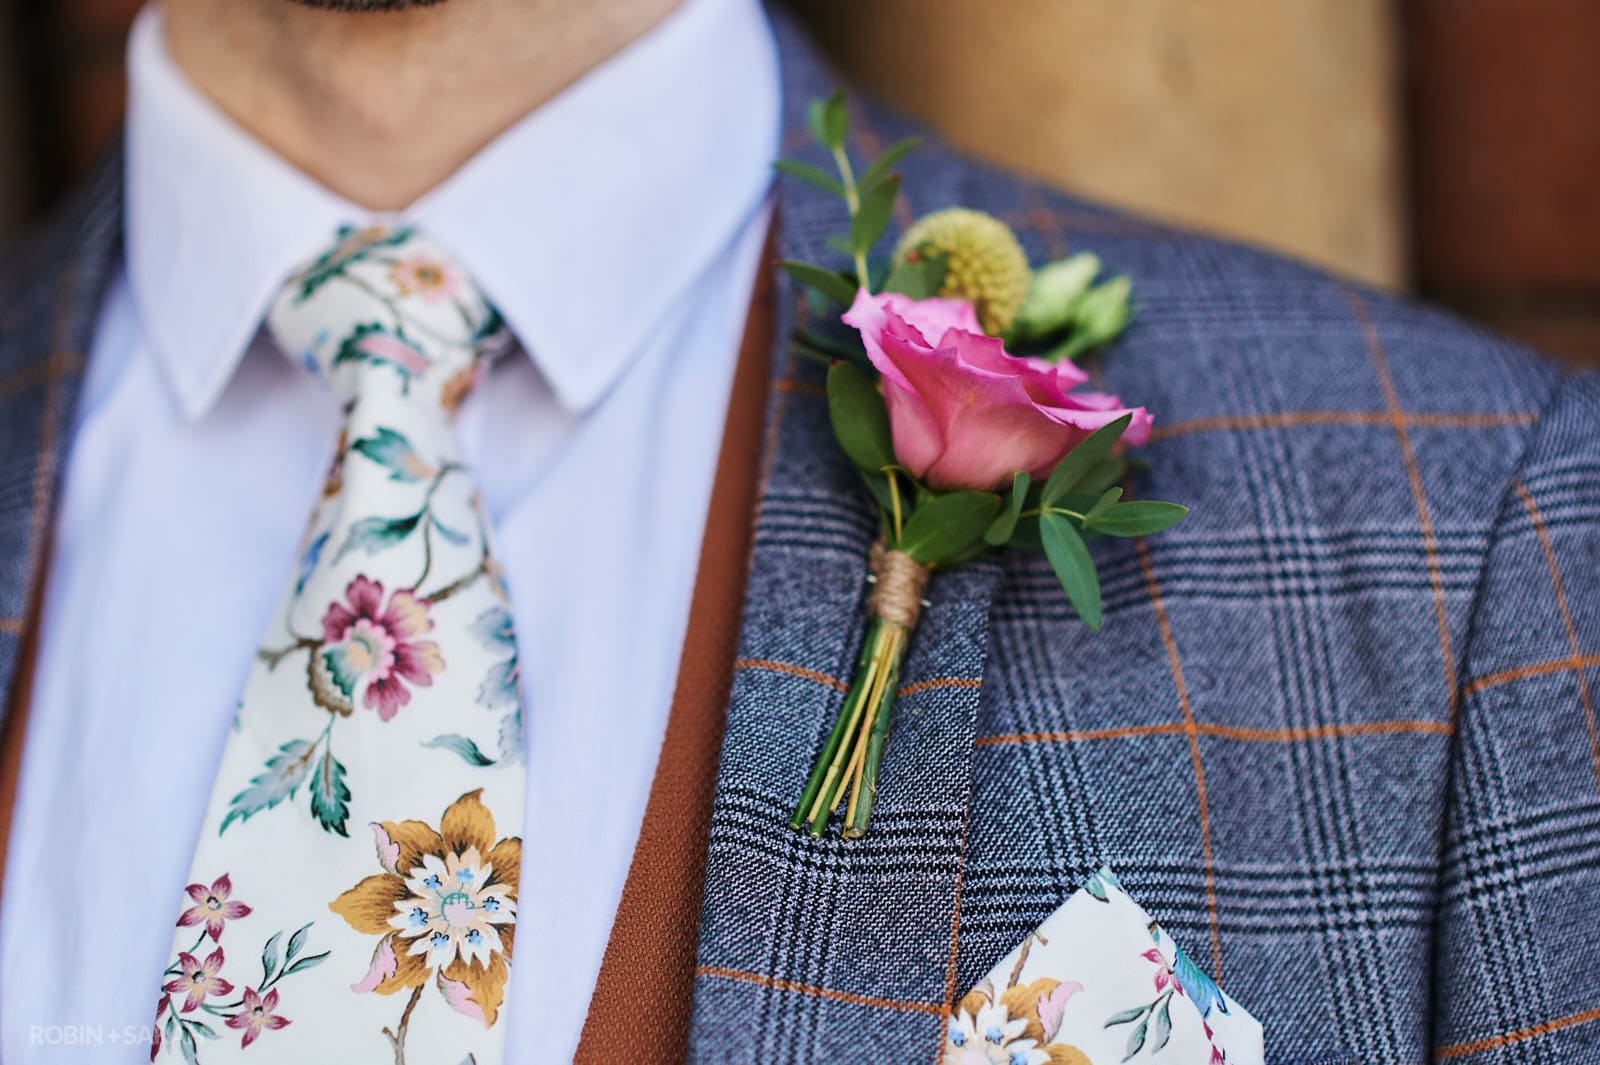 Details of groom's tie and buttonhole flower